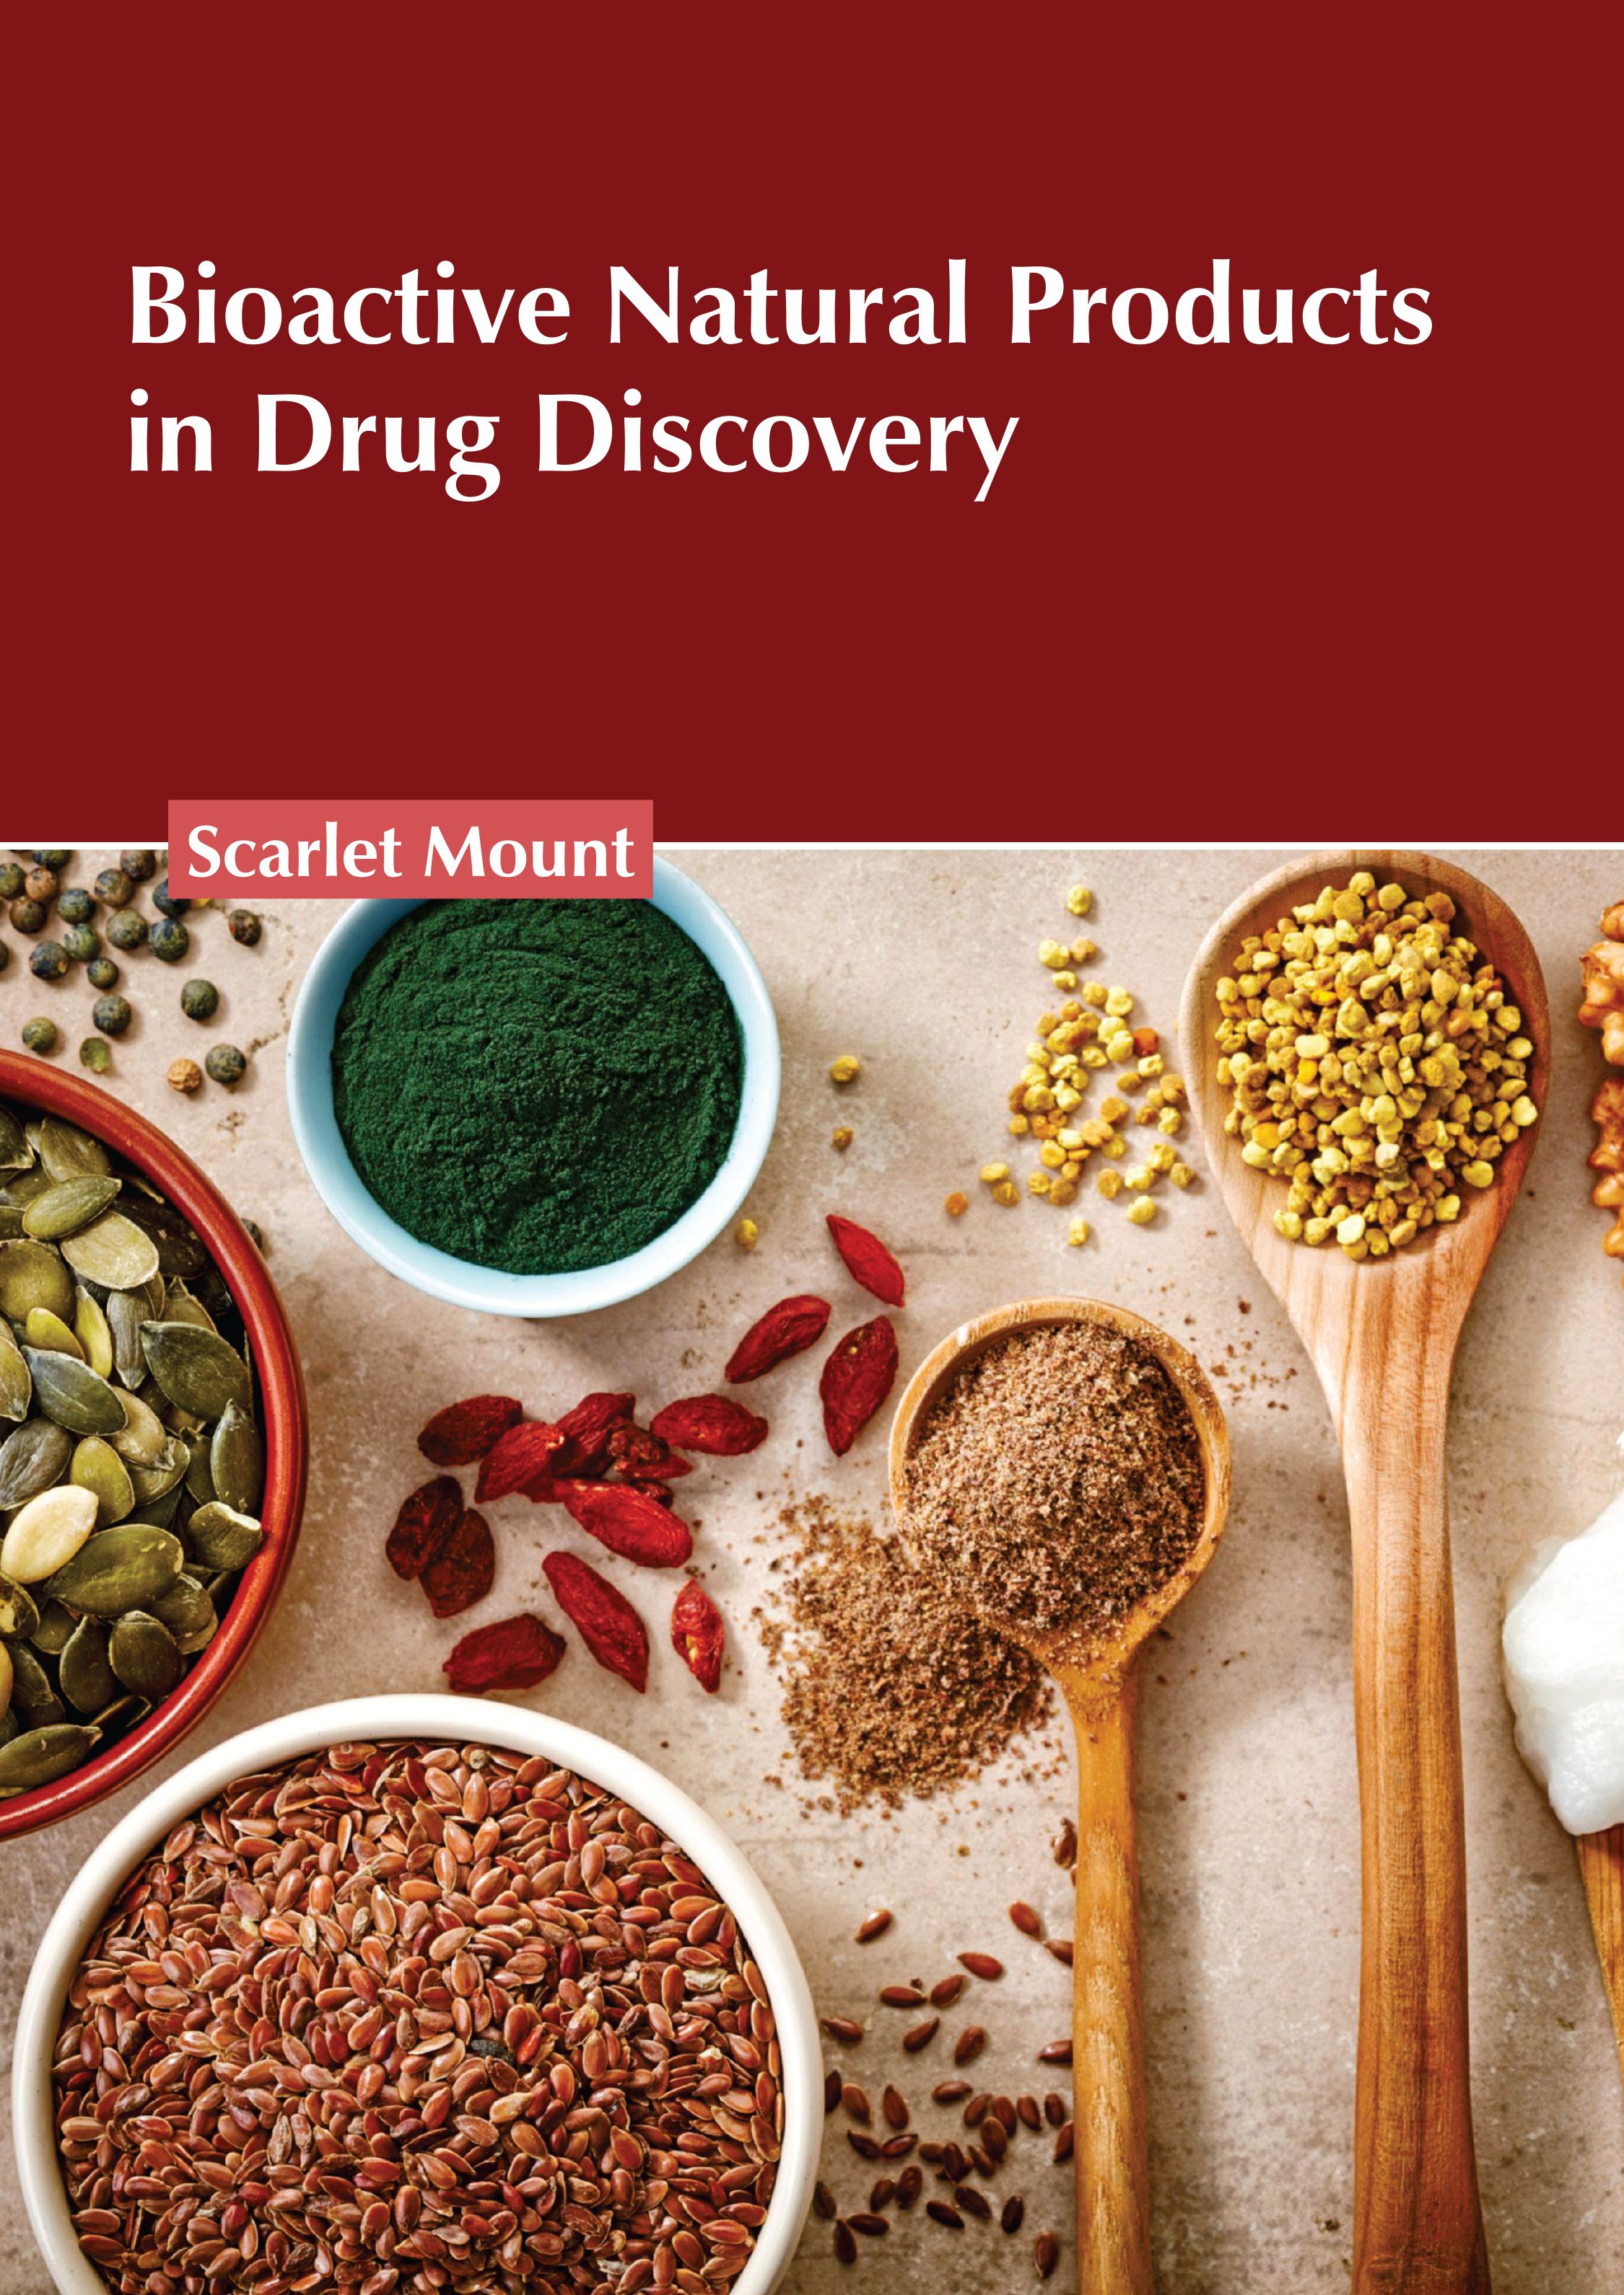 BIOACTIVE NATURAL PRODUCTS IN DRUG DISCOVERY